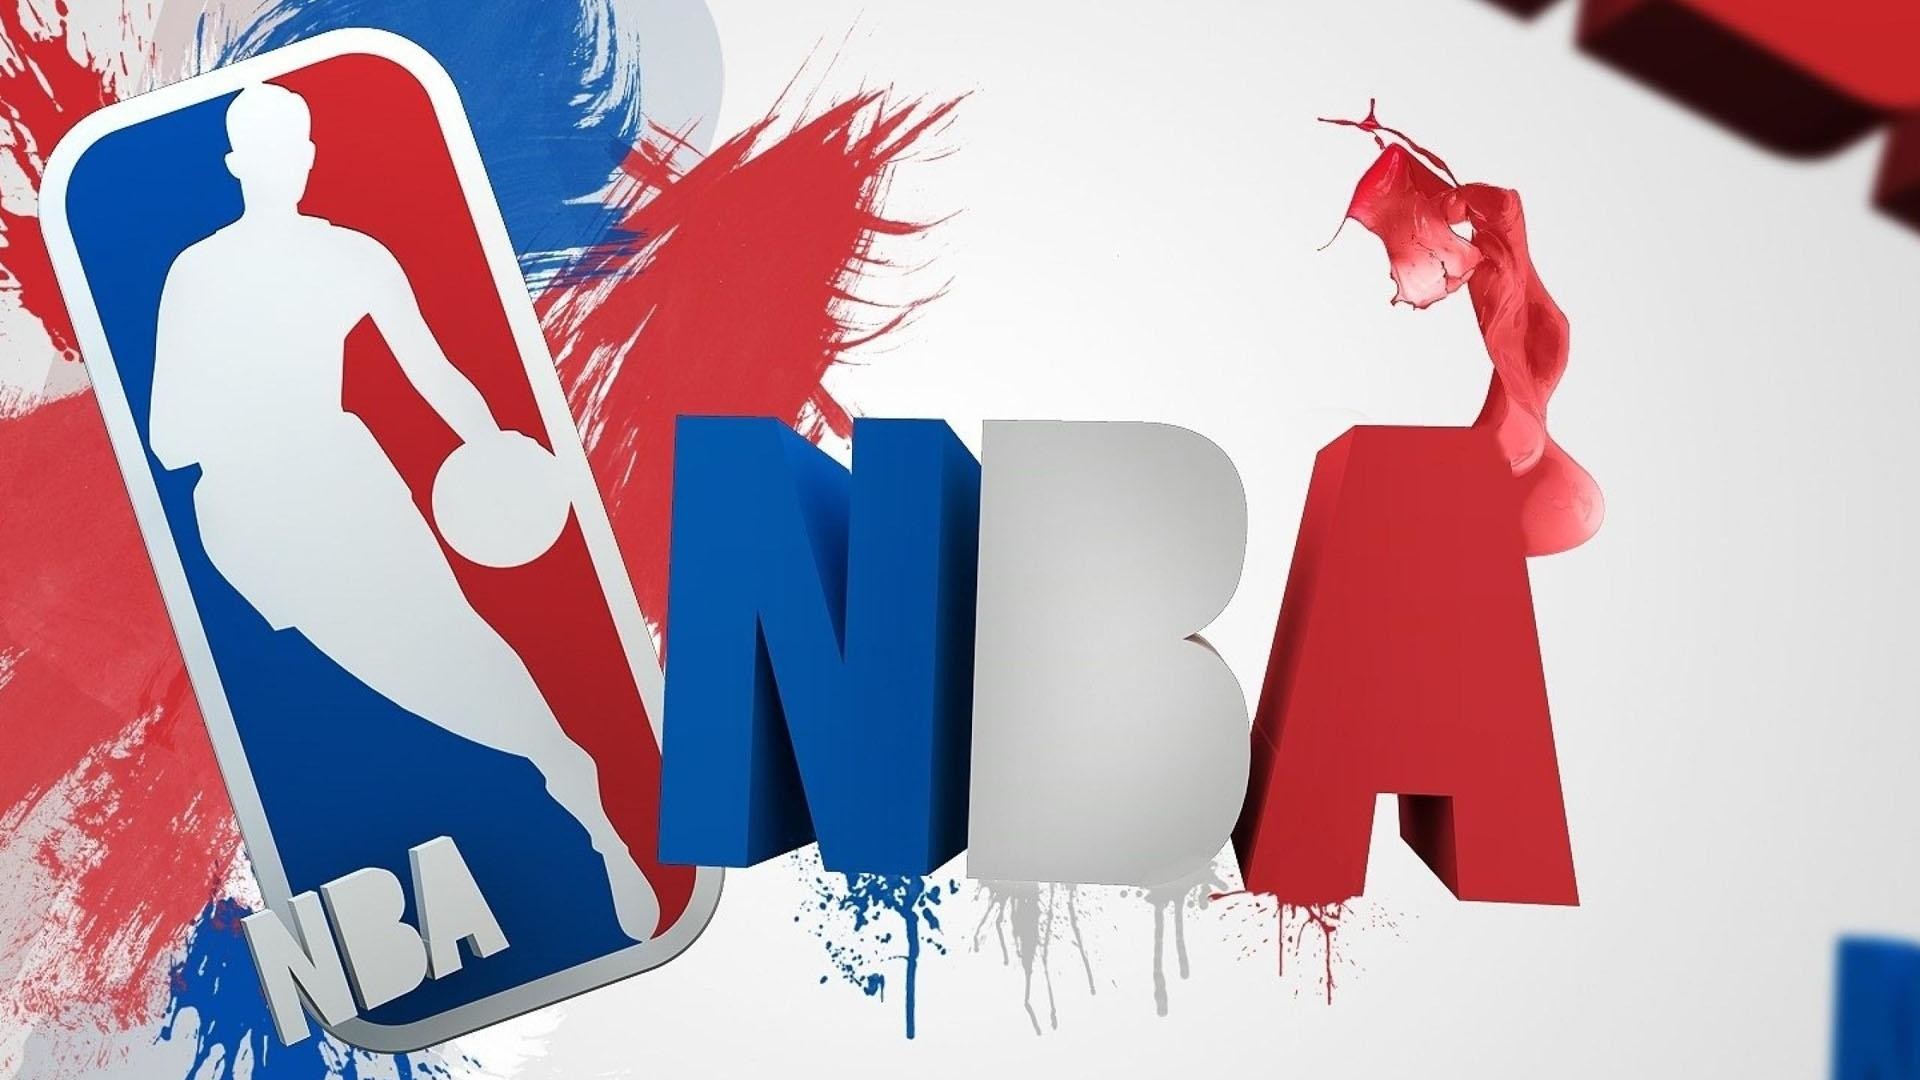 Nba Logo Wallpaper 68 Images Free Download Nude Photo Gallery